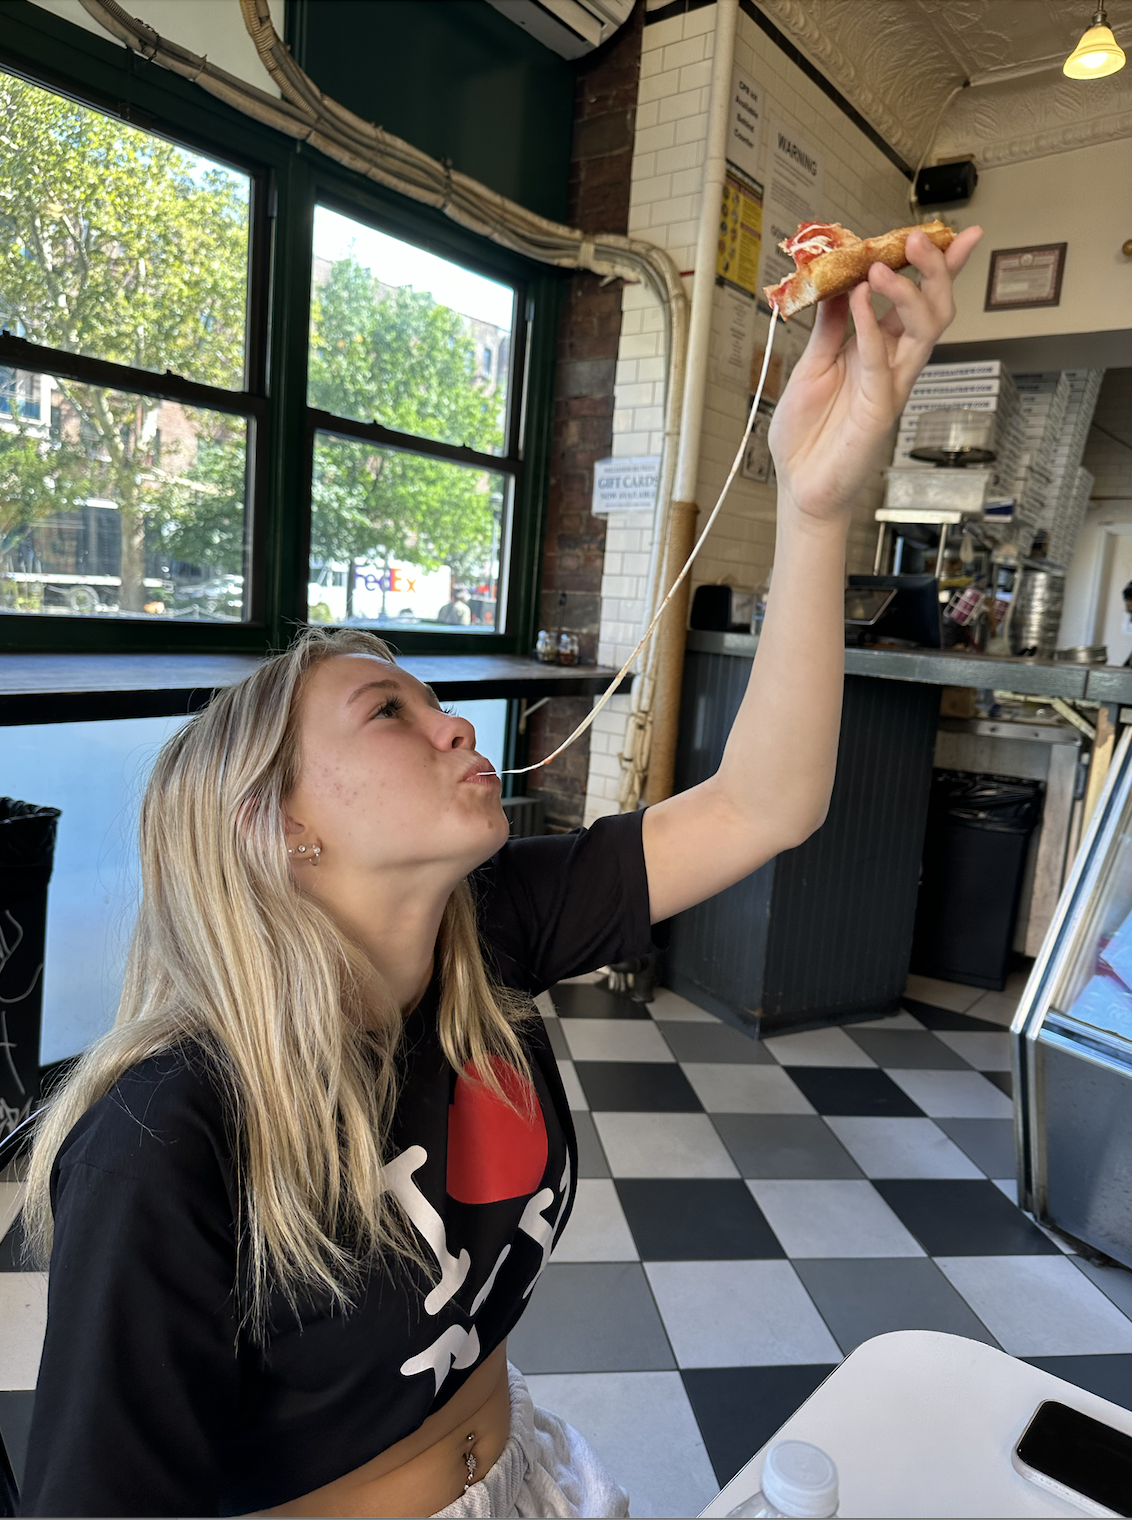 Williamsburg Pizza - Cheese Pull - New York City - August 23, 2023.png